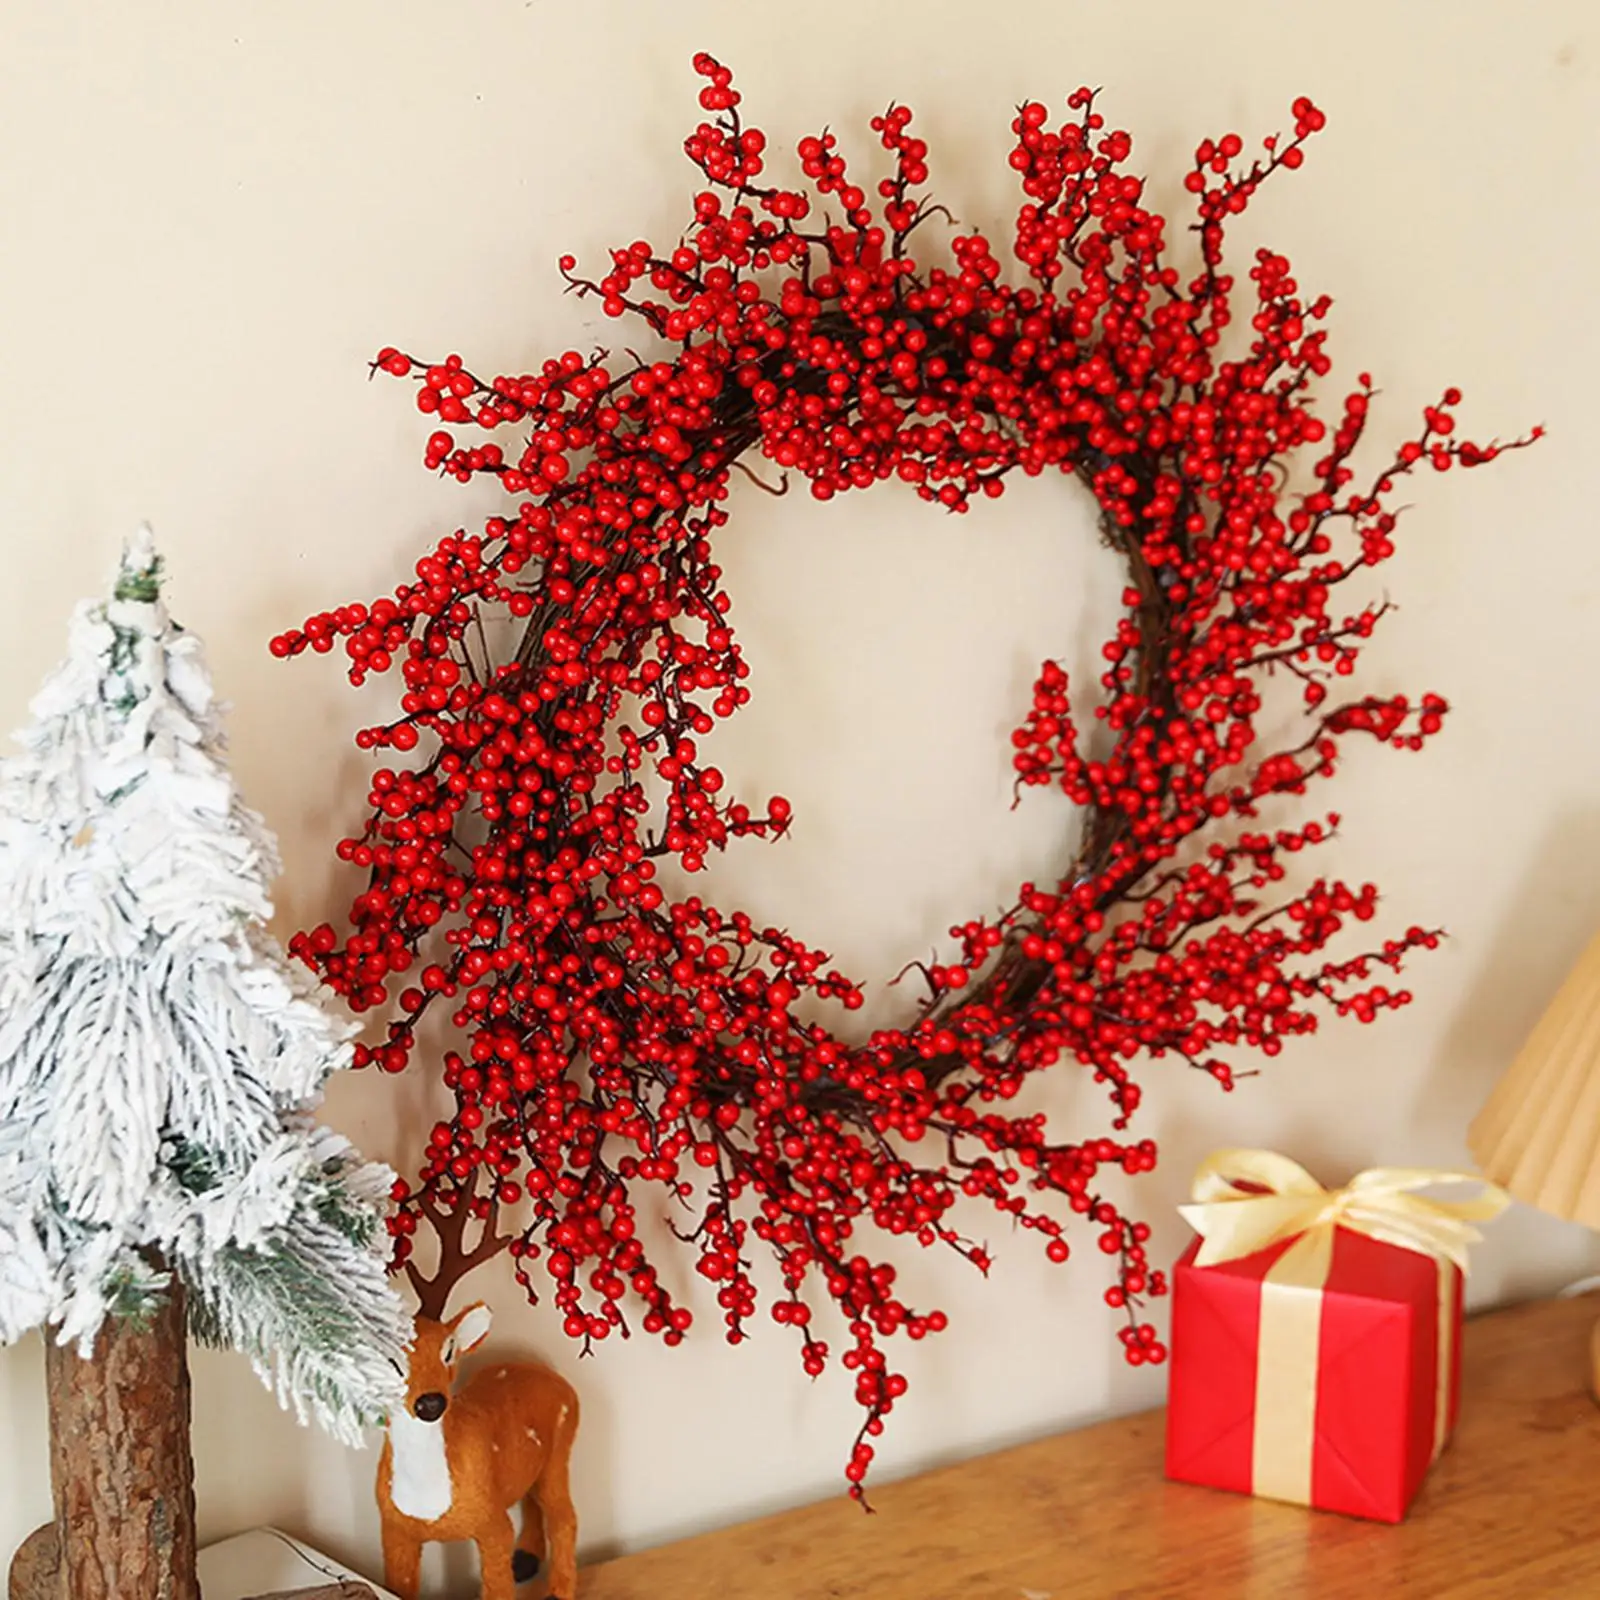 Christmas Wreath Realistic Decorative Front Door Wreath Christmas Decoration Garland for Wall Indoor Outdoor Home Office Wedding